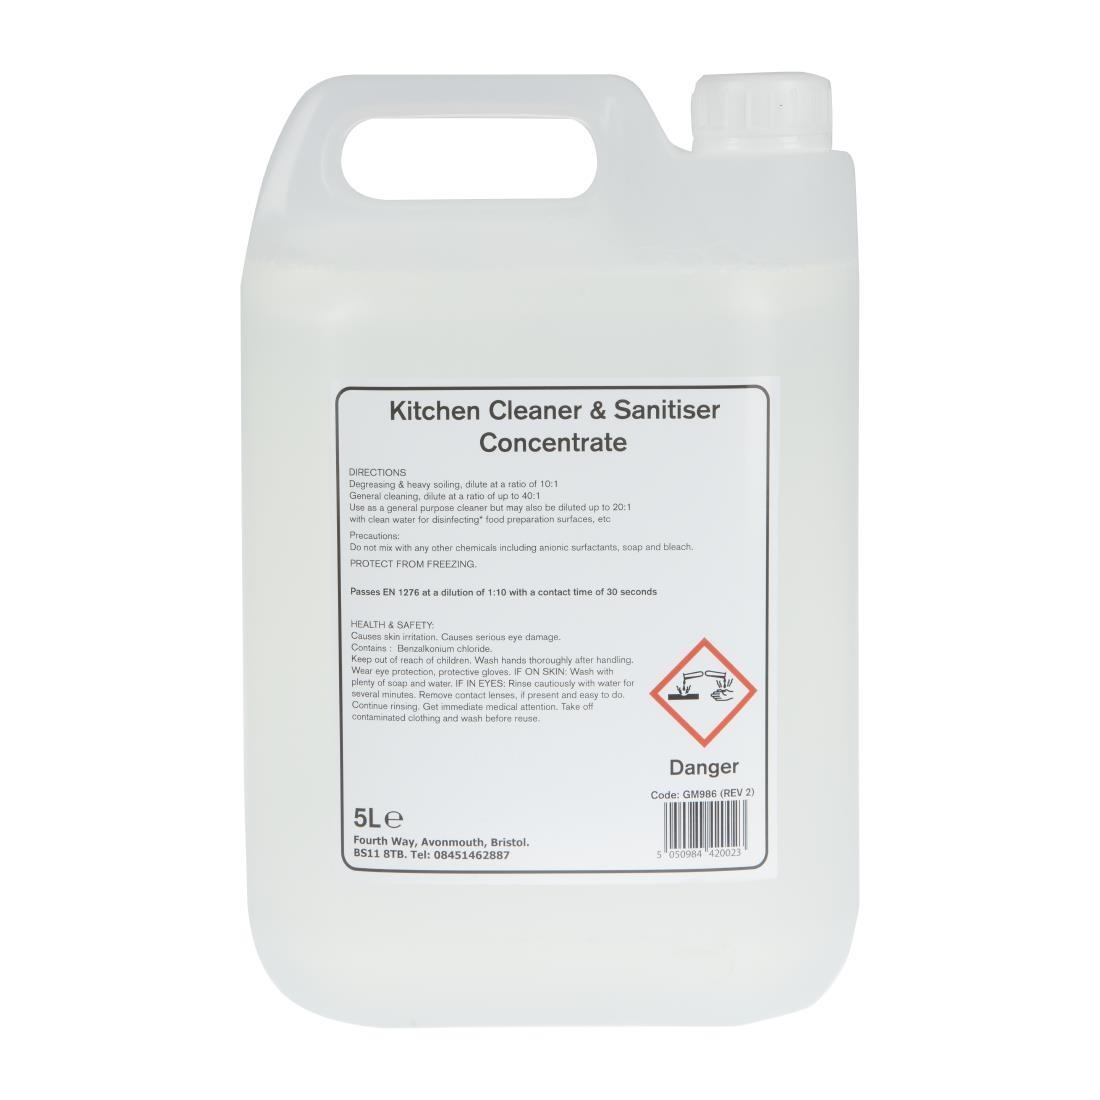 Jantex Pro Kitchen Cleaner and Sanitiser Concentrate 5Ltr - GM986  - 3